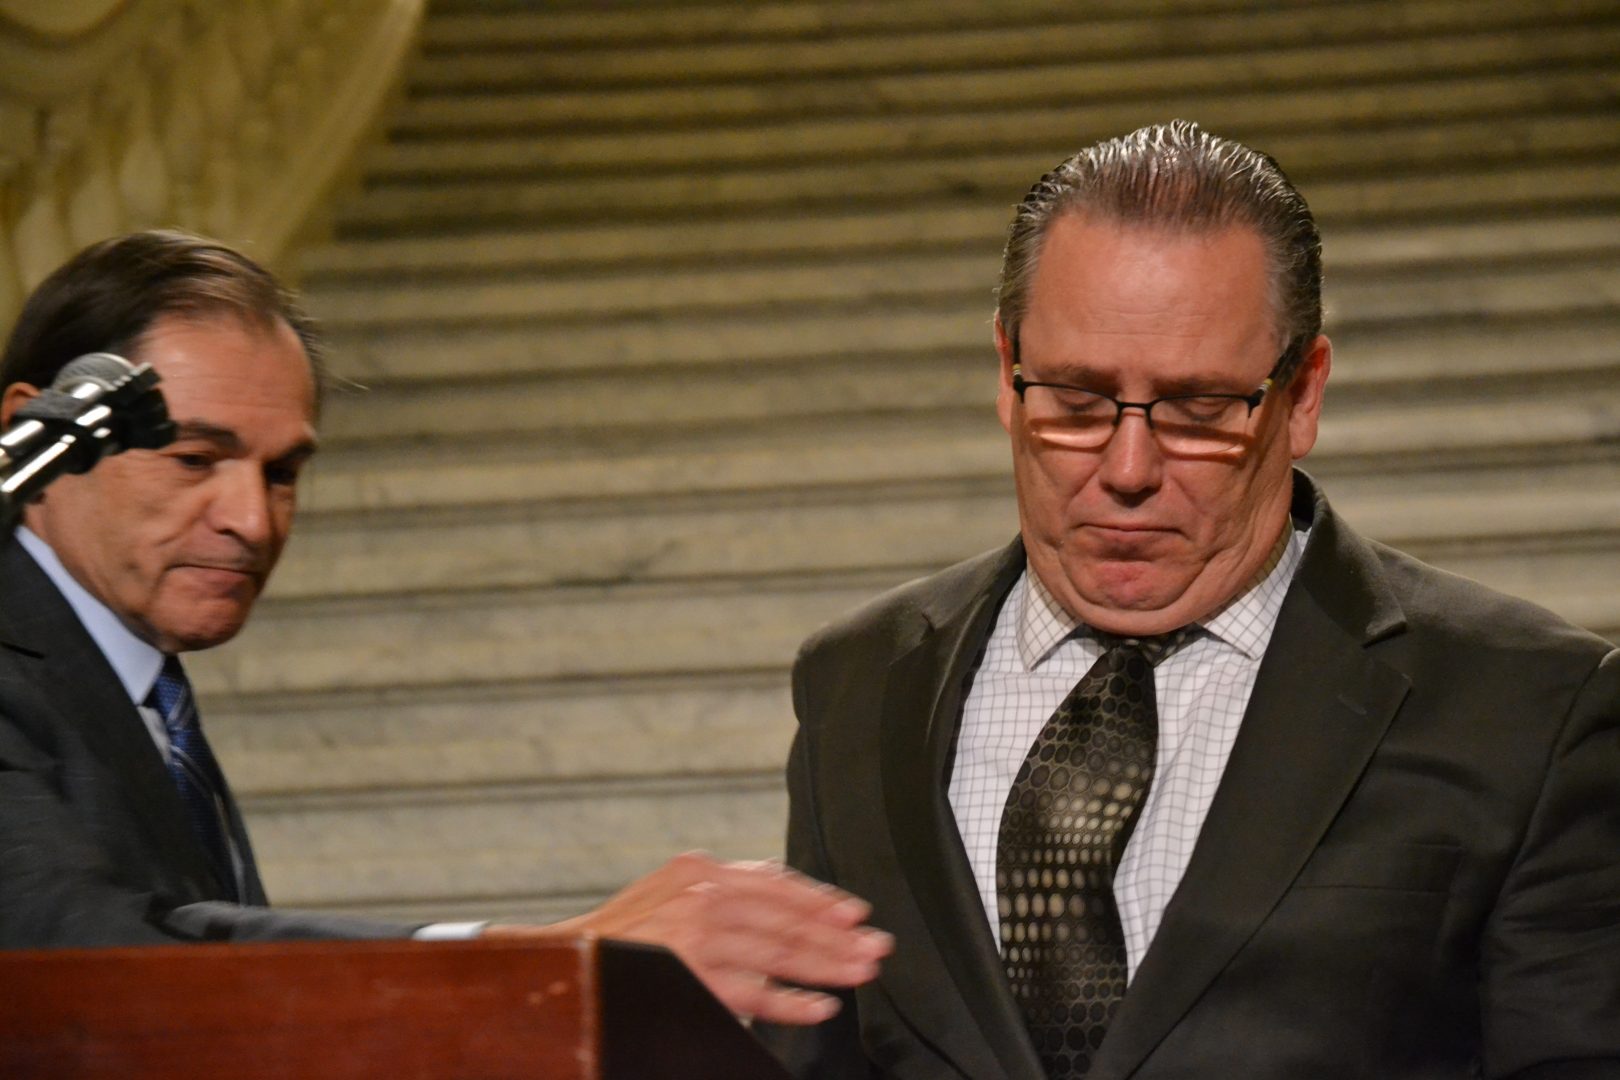 Patrick Duggan leaves the podium after talking to reporters at the Capitol rotunda Thurs., Oct. 10, 2019. Duggan says he was sexually abused by his history teacher at St. Francis of Assisi Catholic School in Harrisburg in the mid-to late 1970s, when Duggan was a teenager. At left is his attorney, Richard Serbin.